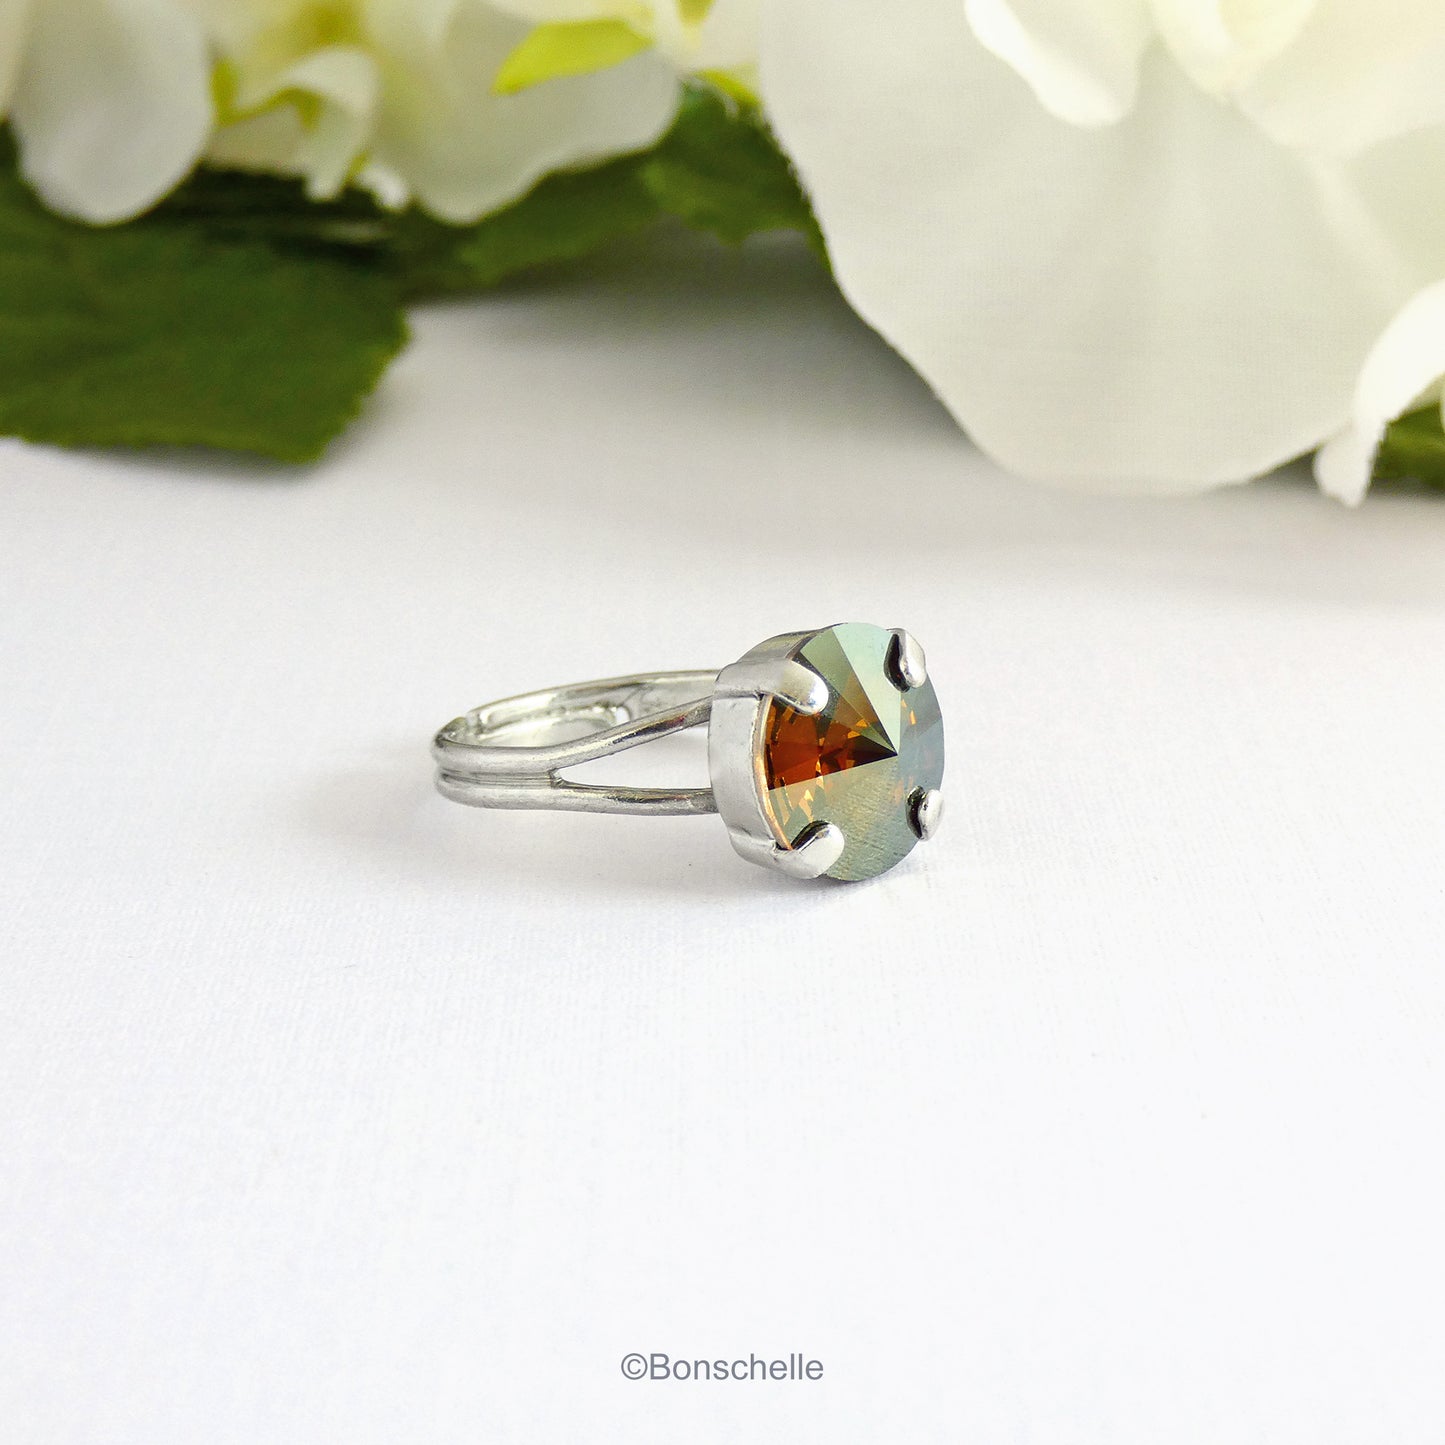 silver toned solitaire ring for women with a deep bronze Swarovksi crystal stone.